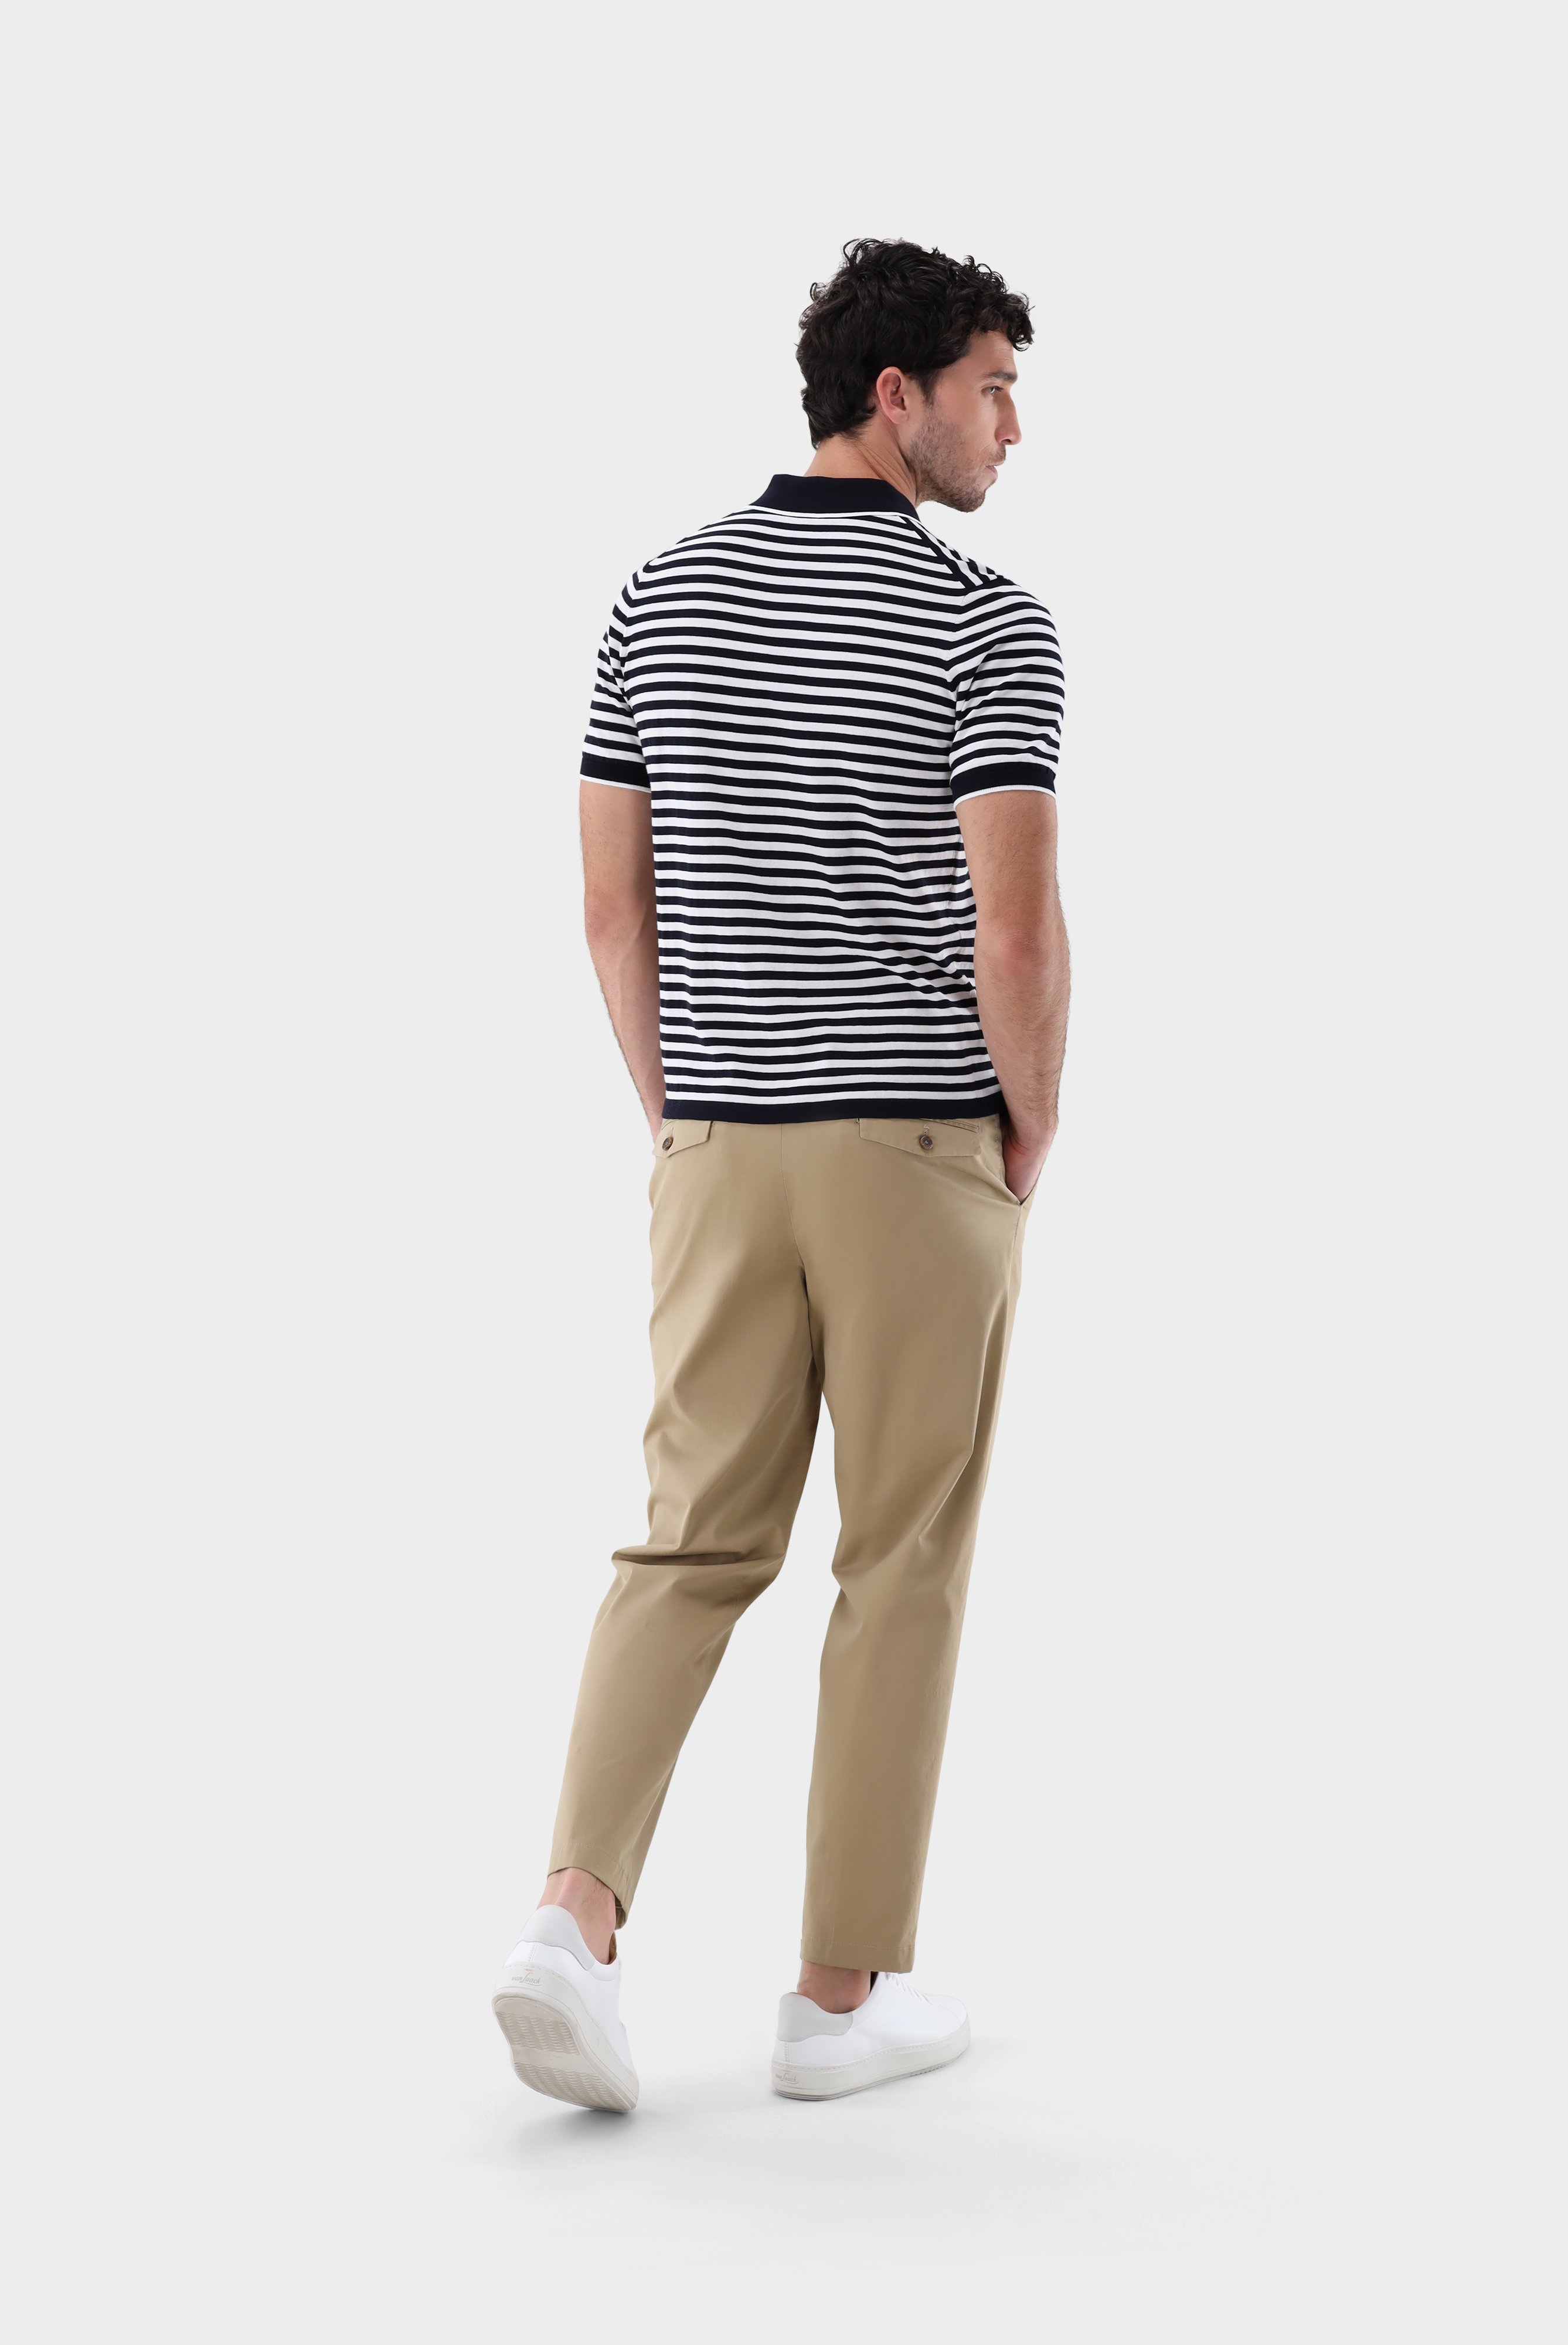 Poloshirts+Striped Knit Polo made of Air Cotton+82.8510..S00266.795.S